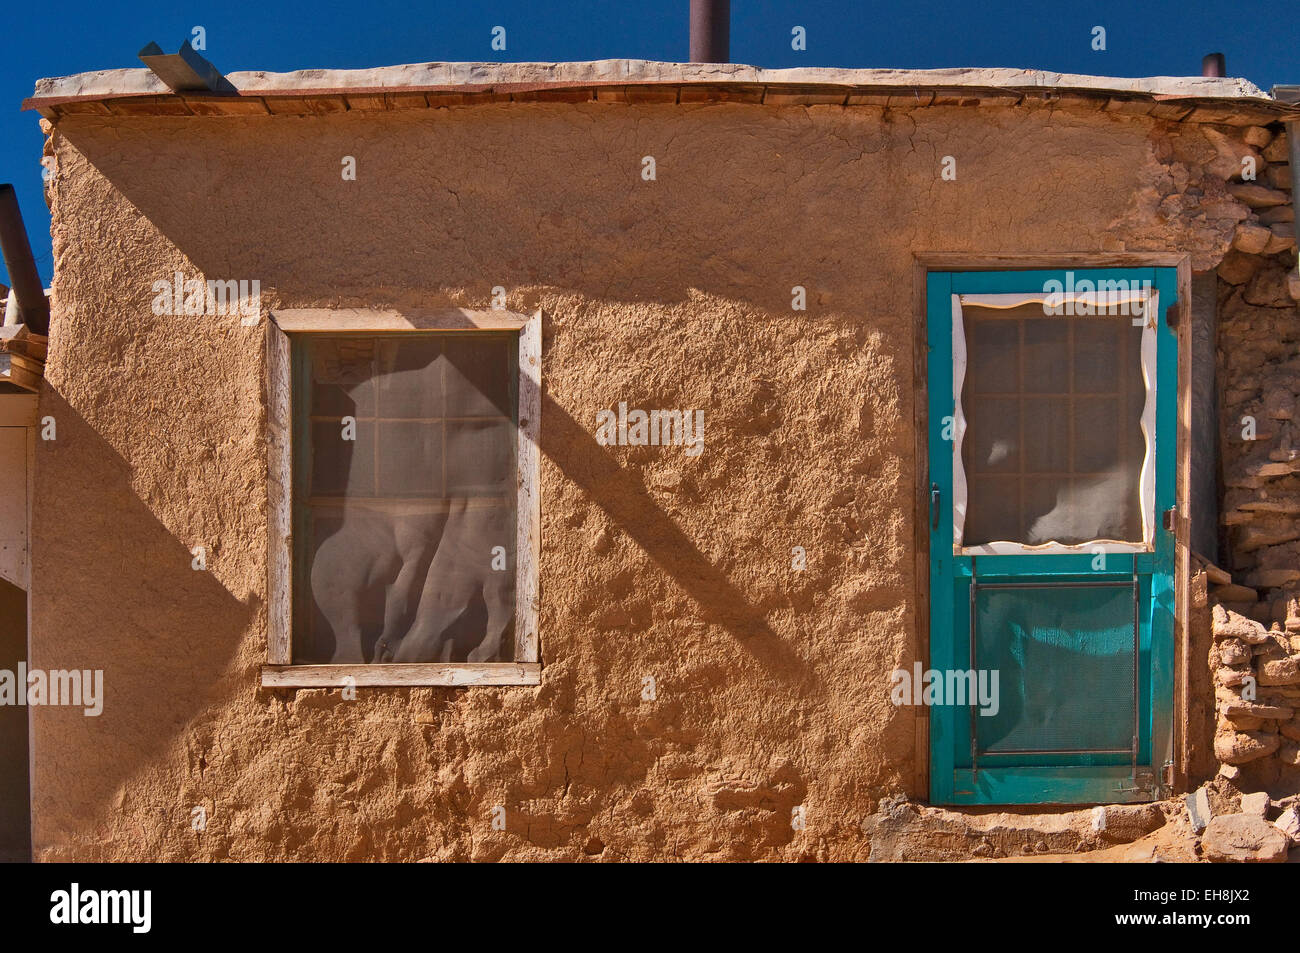 Detail of adobe house in Acoma Pueblo (Sky City), Native American pueblo in Acoma Indian Reservation, New Mexico, USA Stock Photo